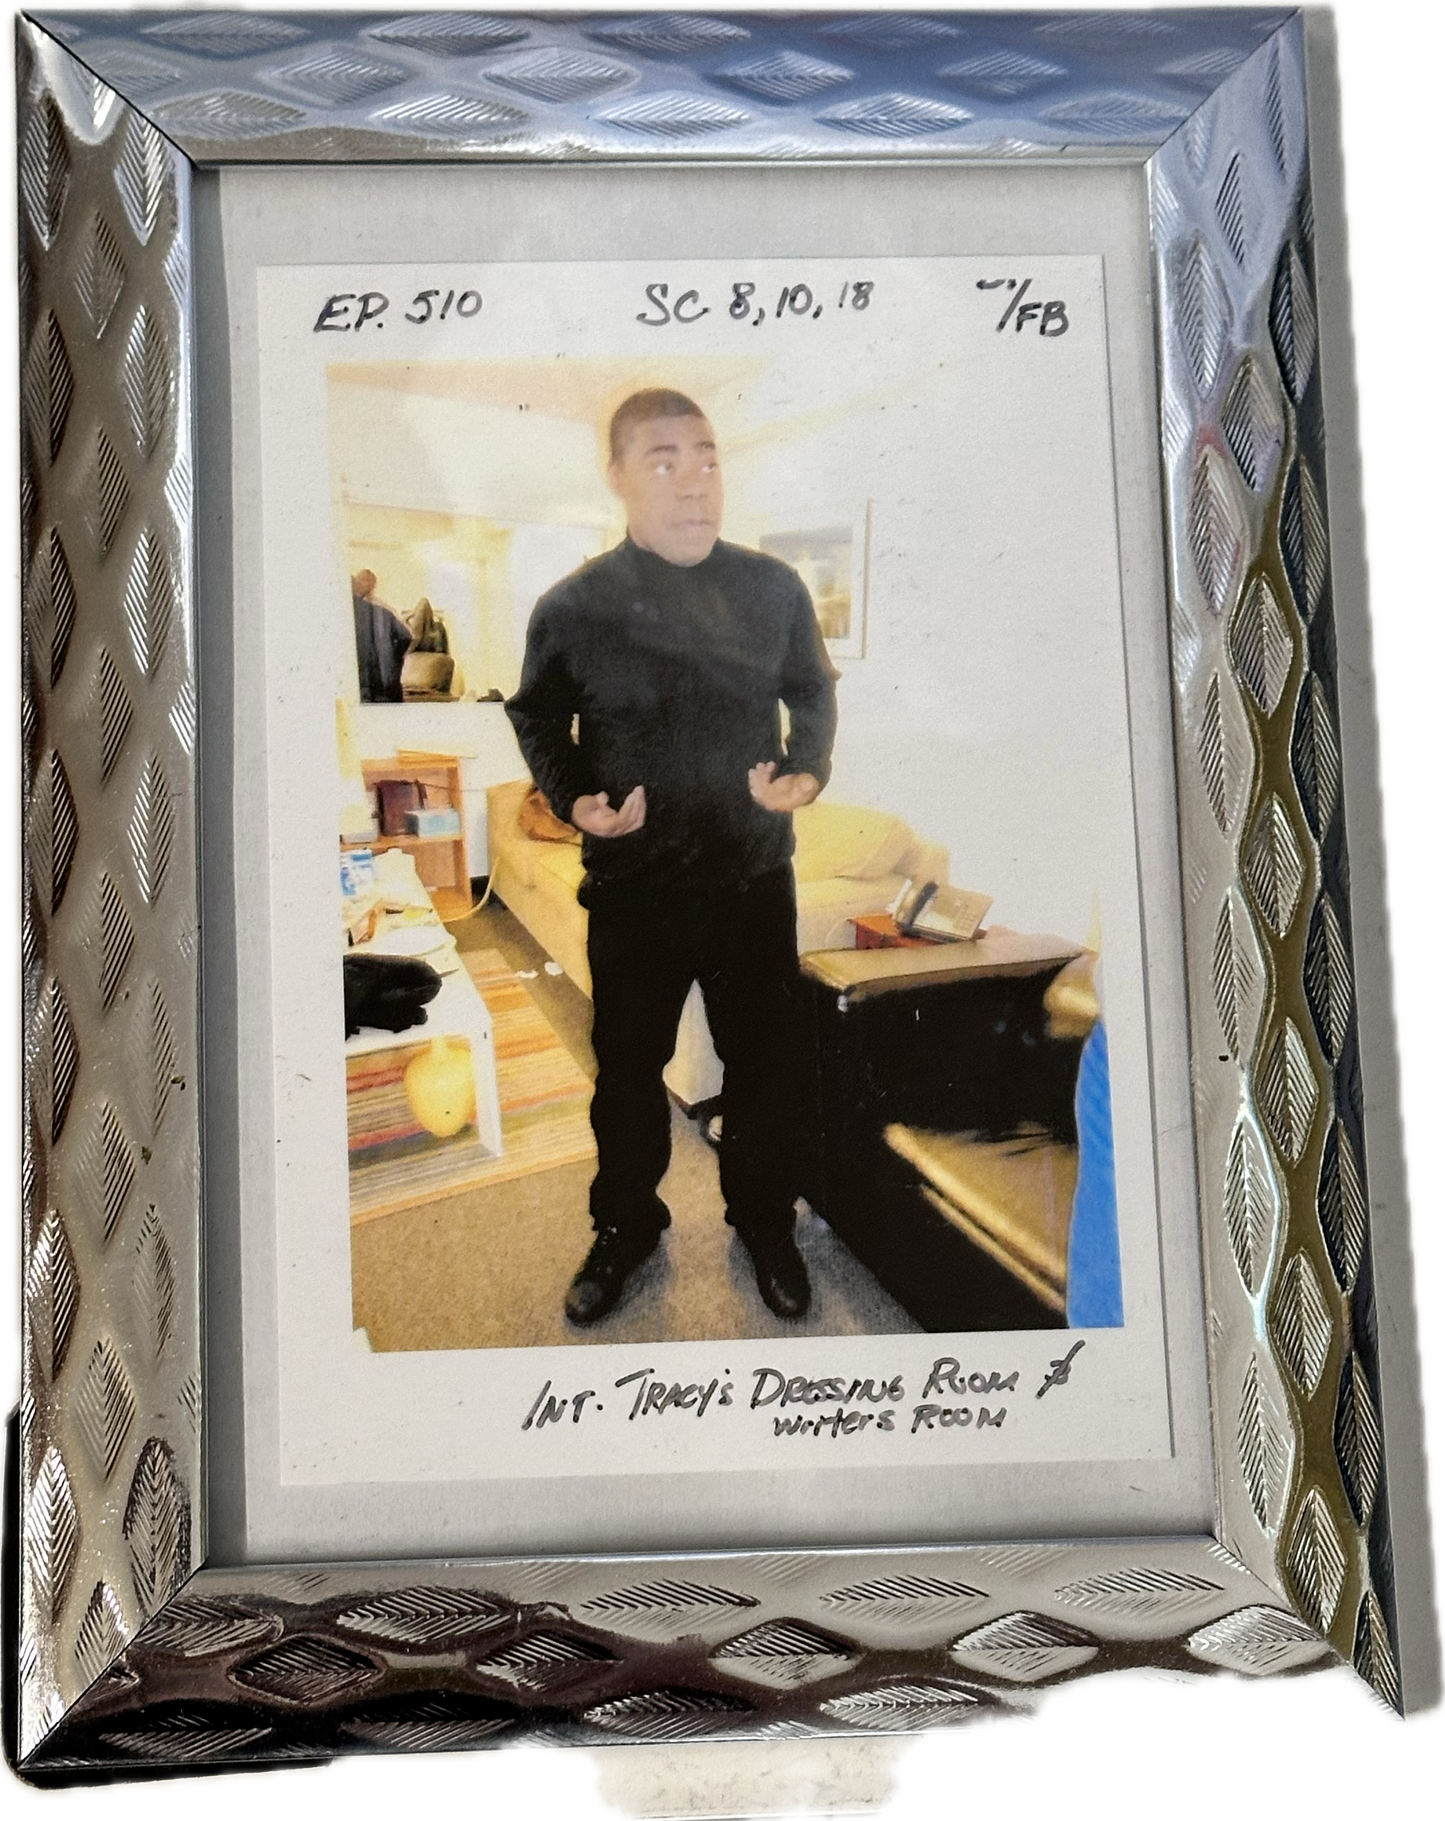 30 ROCK: Tracy Exclusive Behind The Scenes Continuity Framed Photos